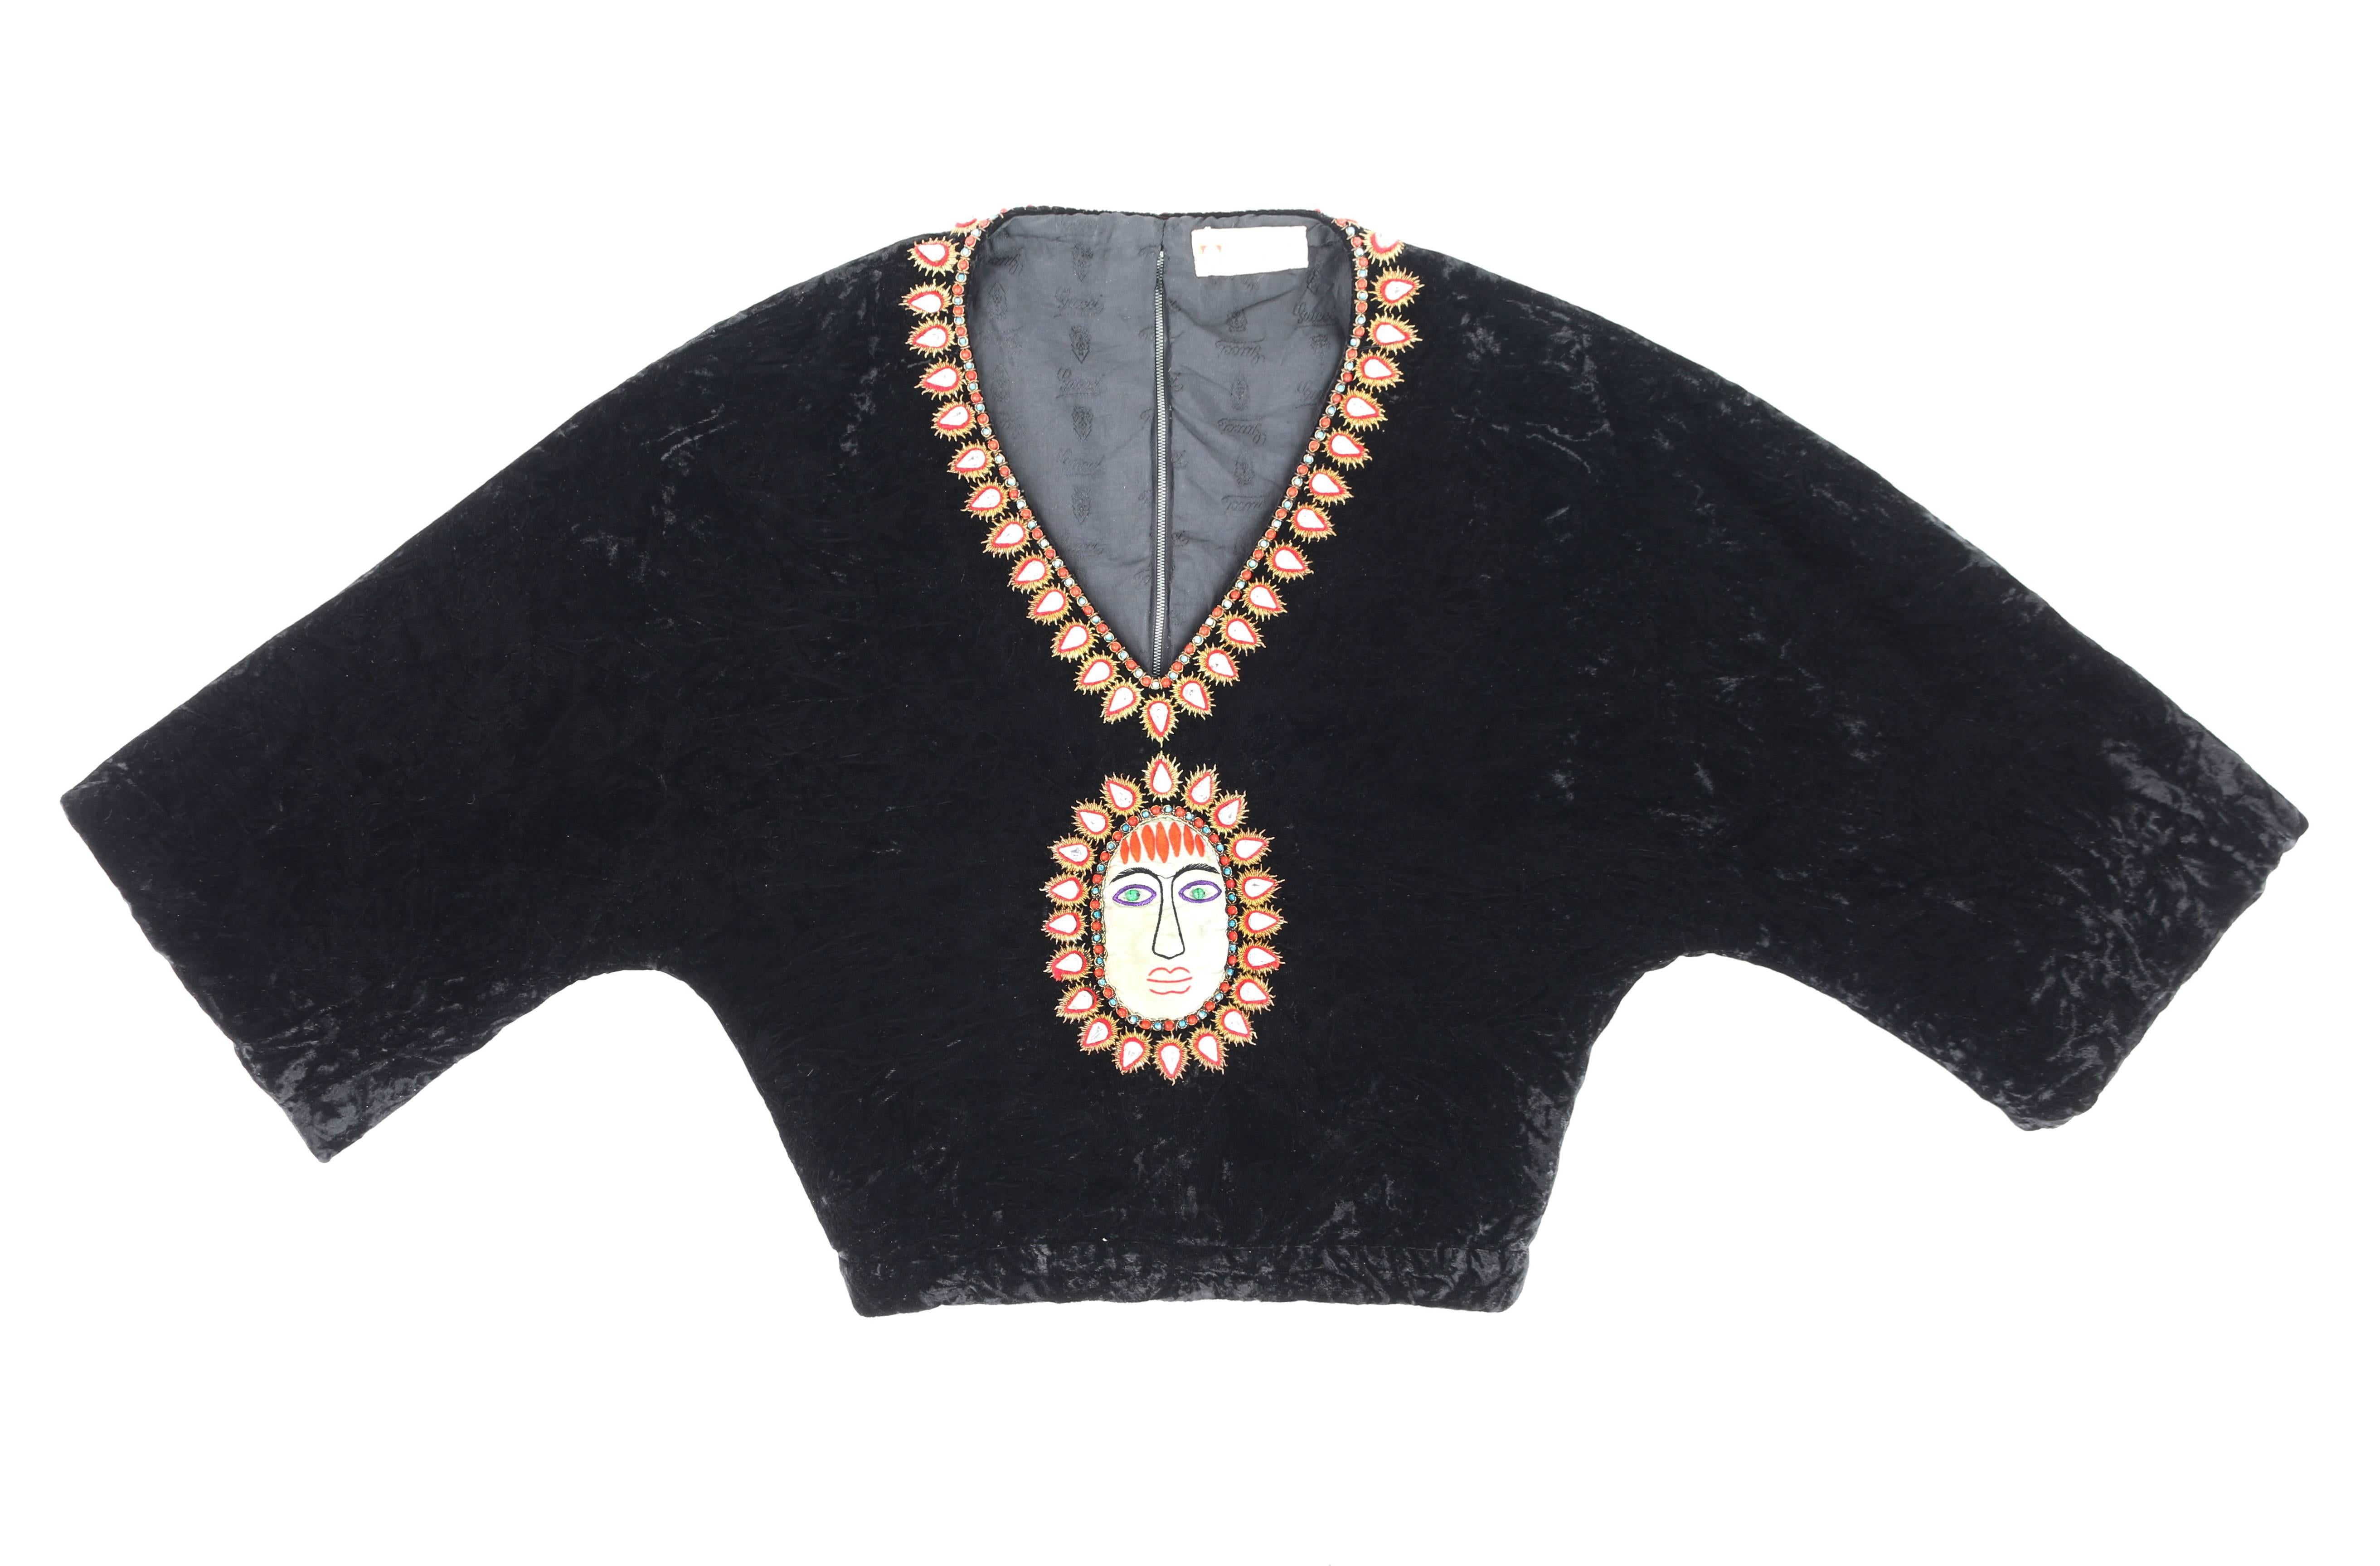 Extremely rare vintage Gucci c.1970's black crushed velvet cropped blouse. Bohemian beaded and embroidered detail at neckline and center front made up of blue and red rounded glass beads, faceted tear drop crystals with red and gold surrounding